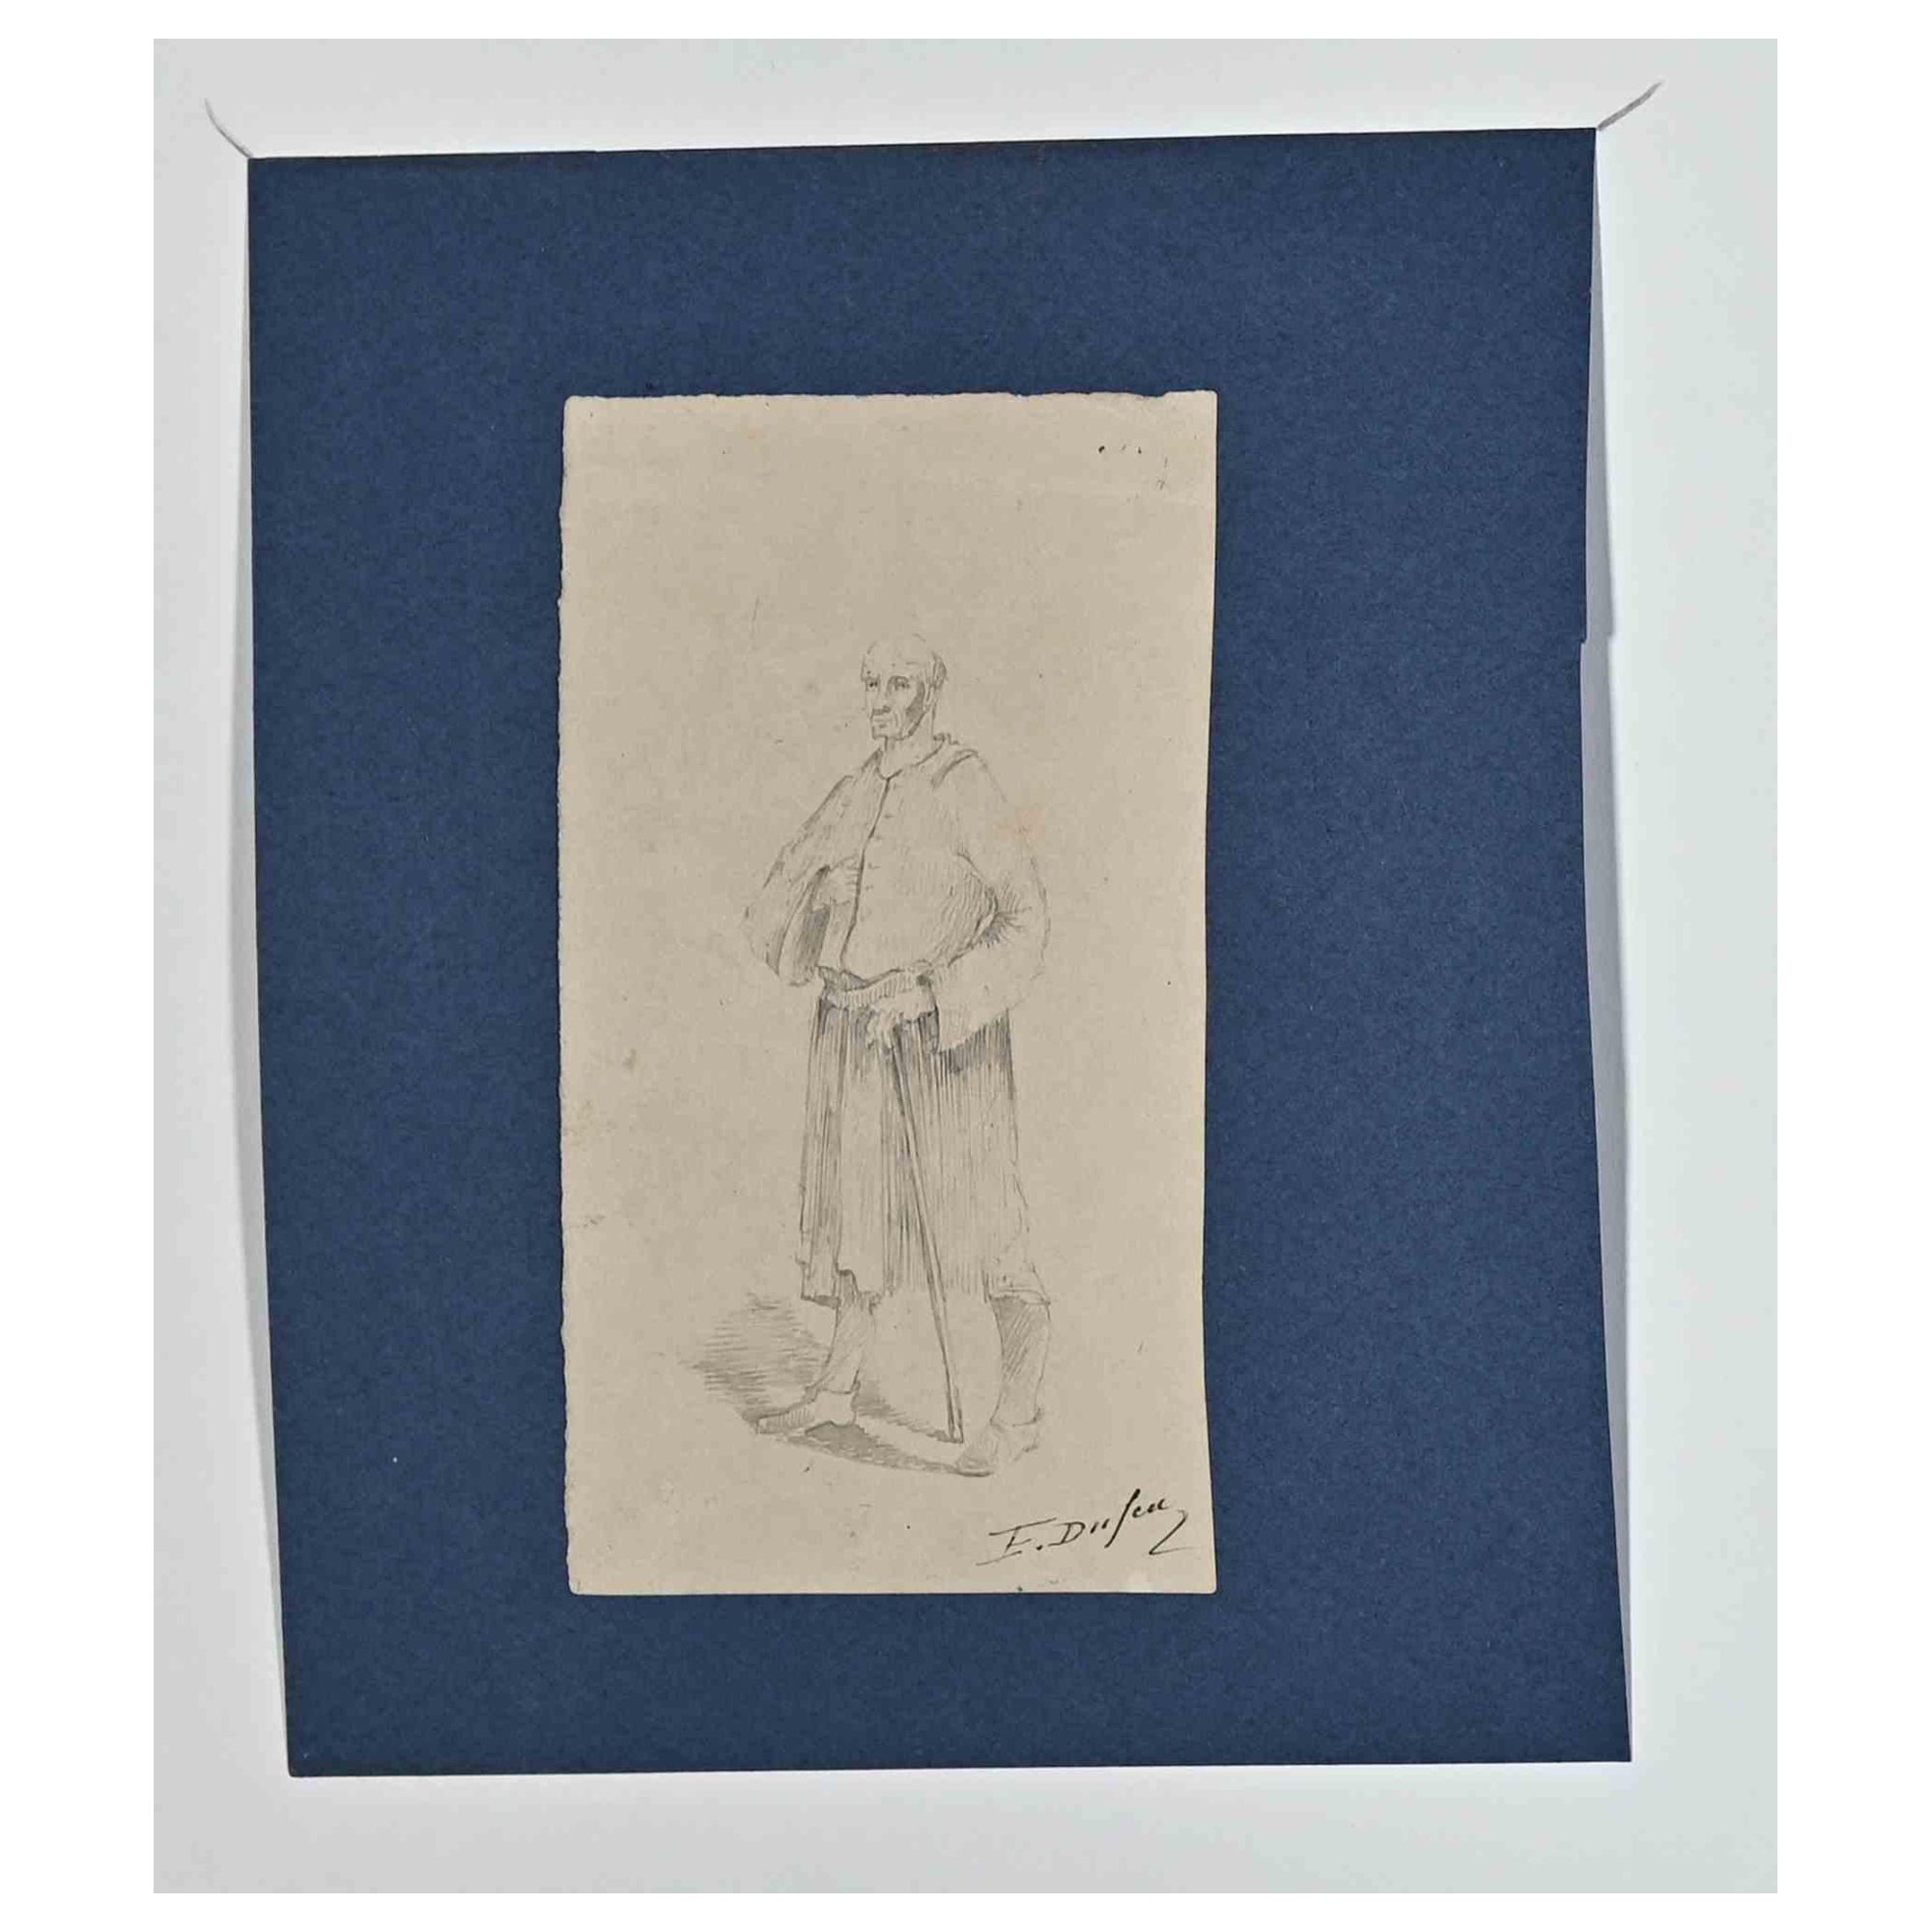 Pilgrim is an original drawing in pencil on paper realized by Edouard Dufeu in 1880s.

Hand-signed on the lower.

Included a white Passepartout: 37 x30 cm

Good conditions and aged.

The artwork is represented through delicate and deft strokes by